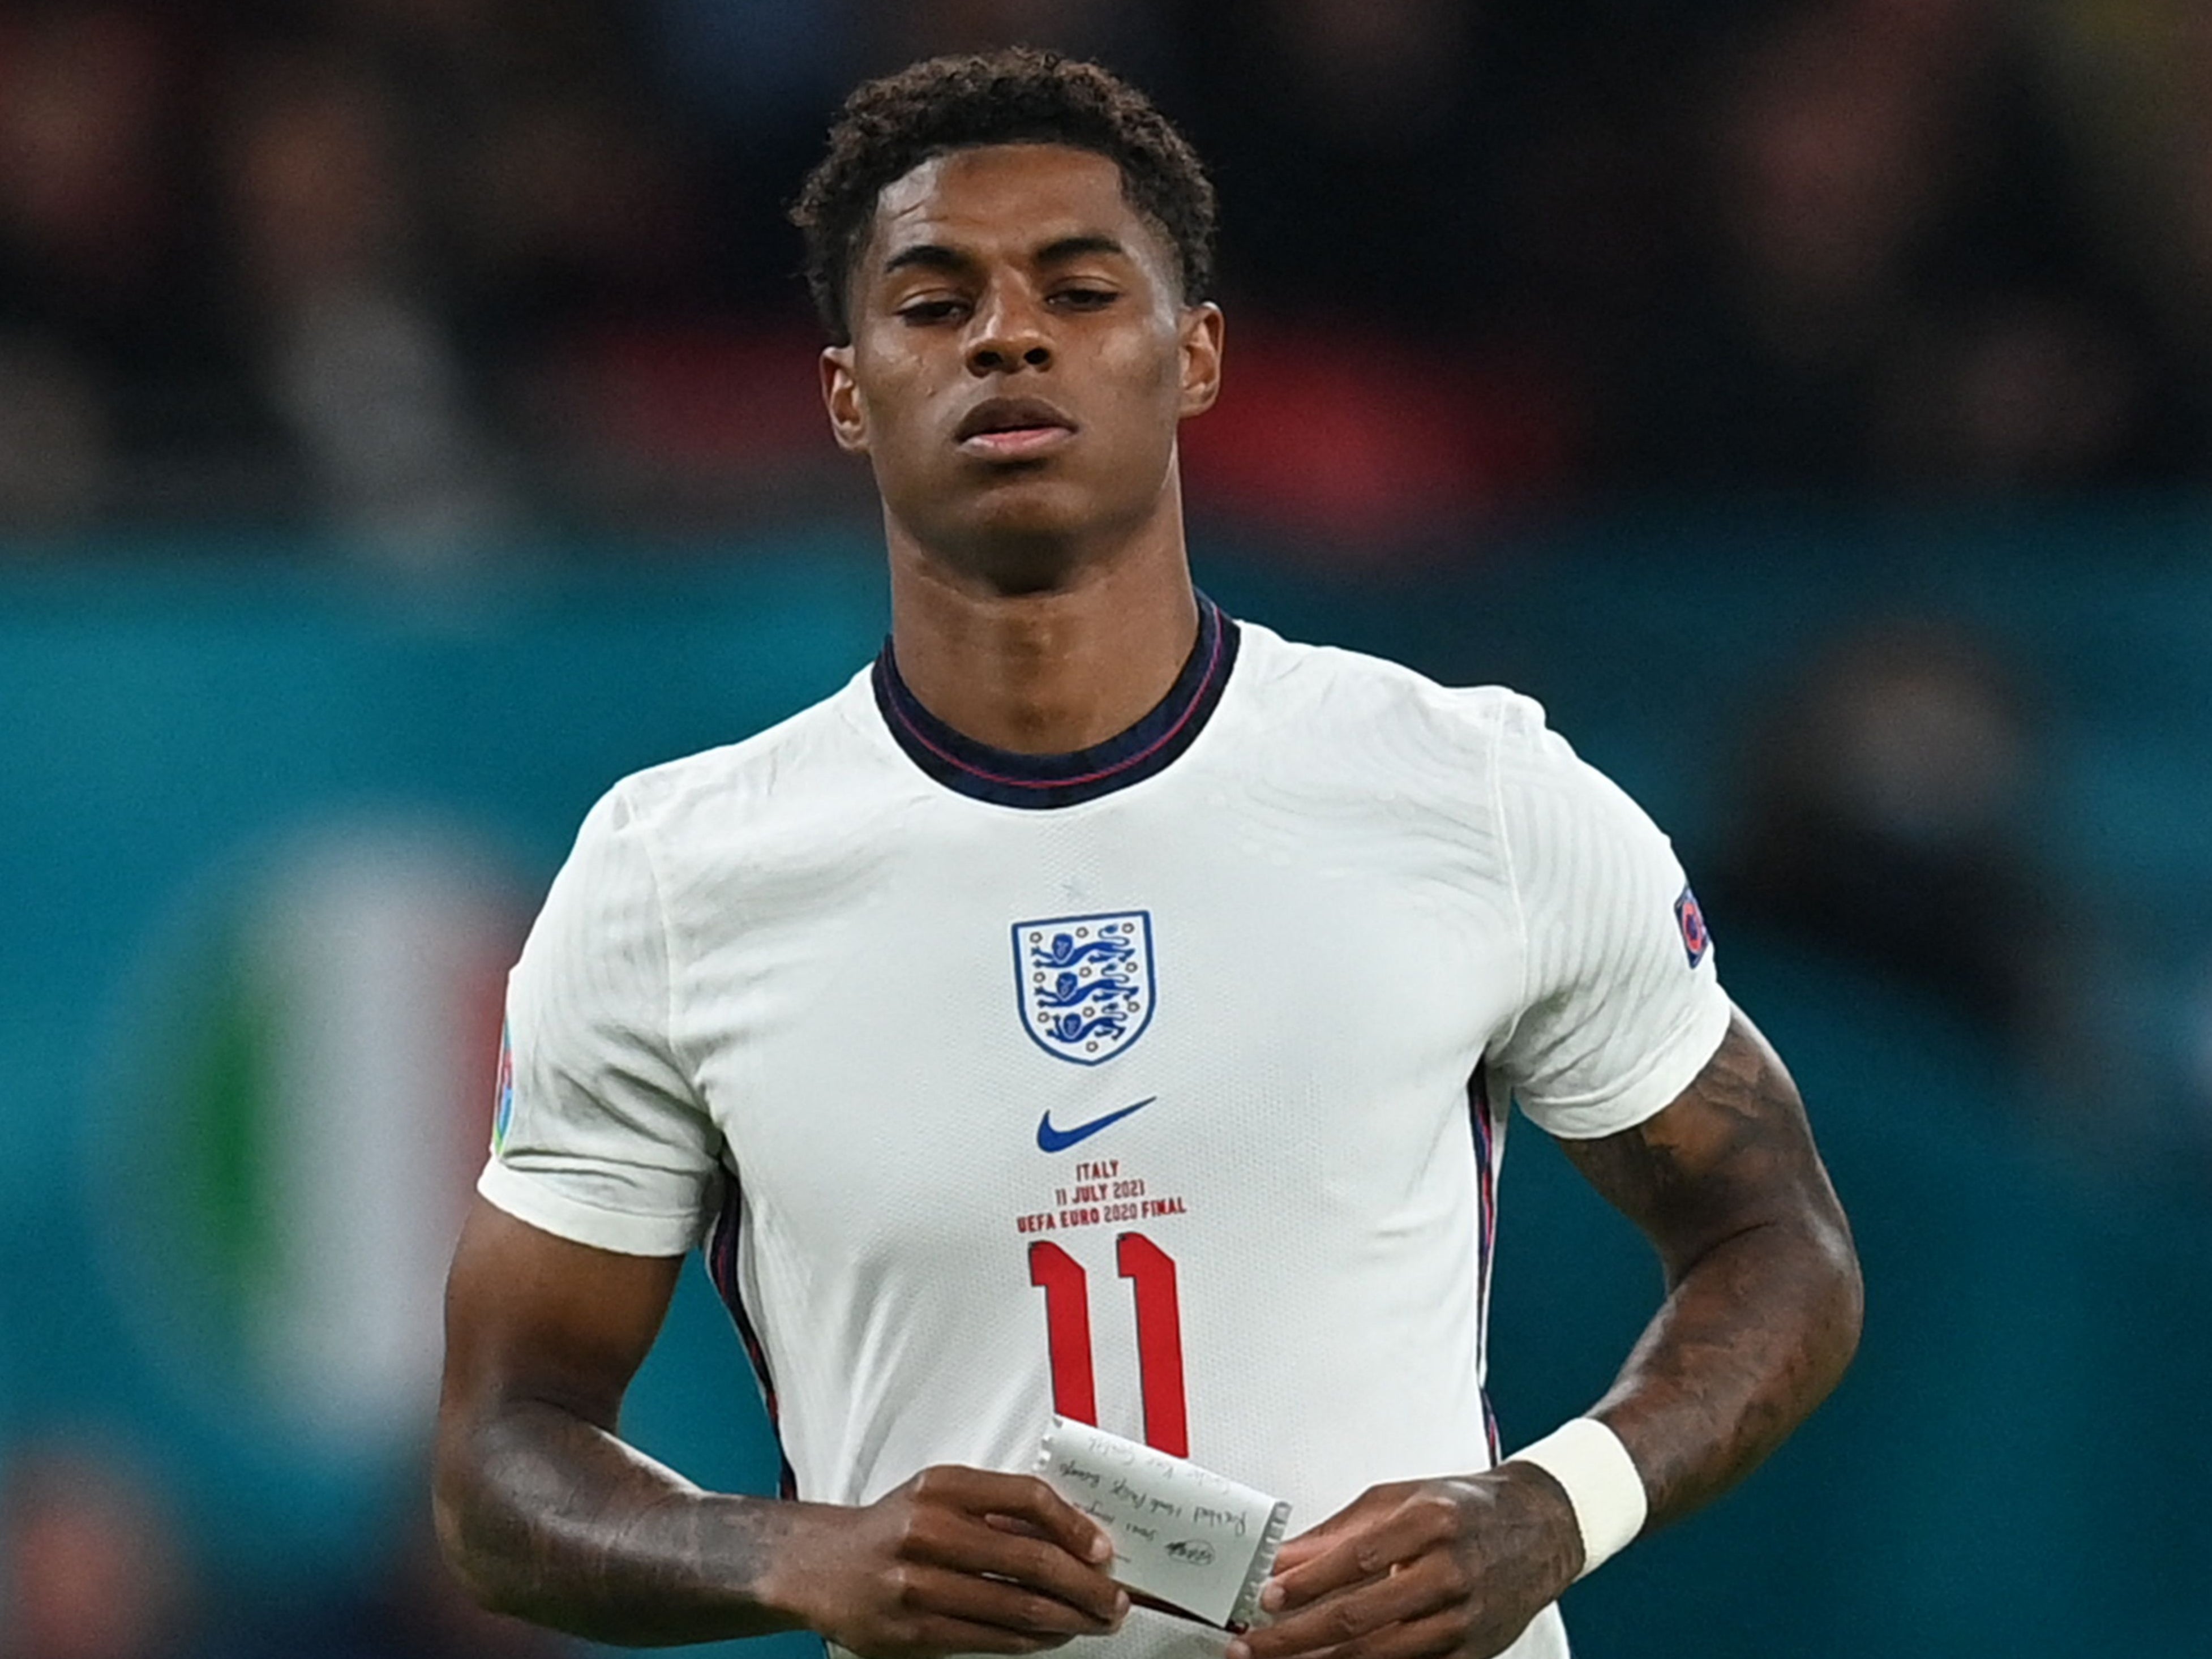 England forward Marcus Rashford has not been included in Gareth Southgate’s latest squad